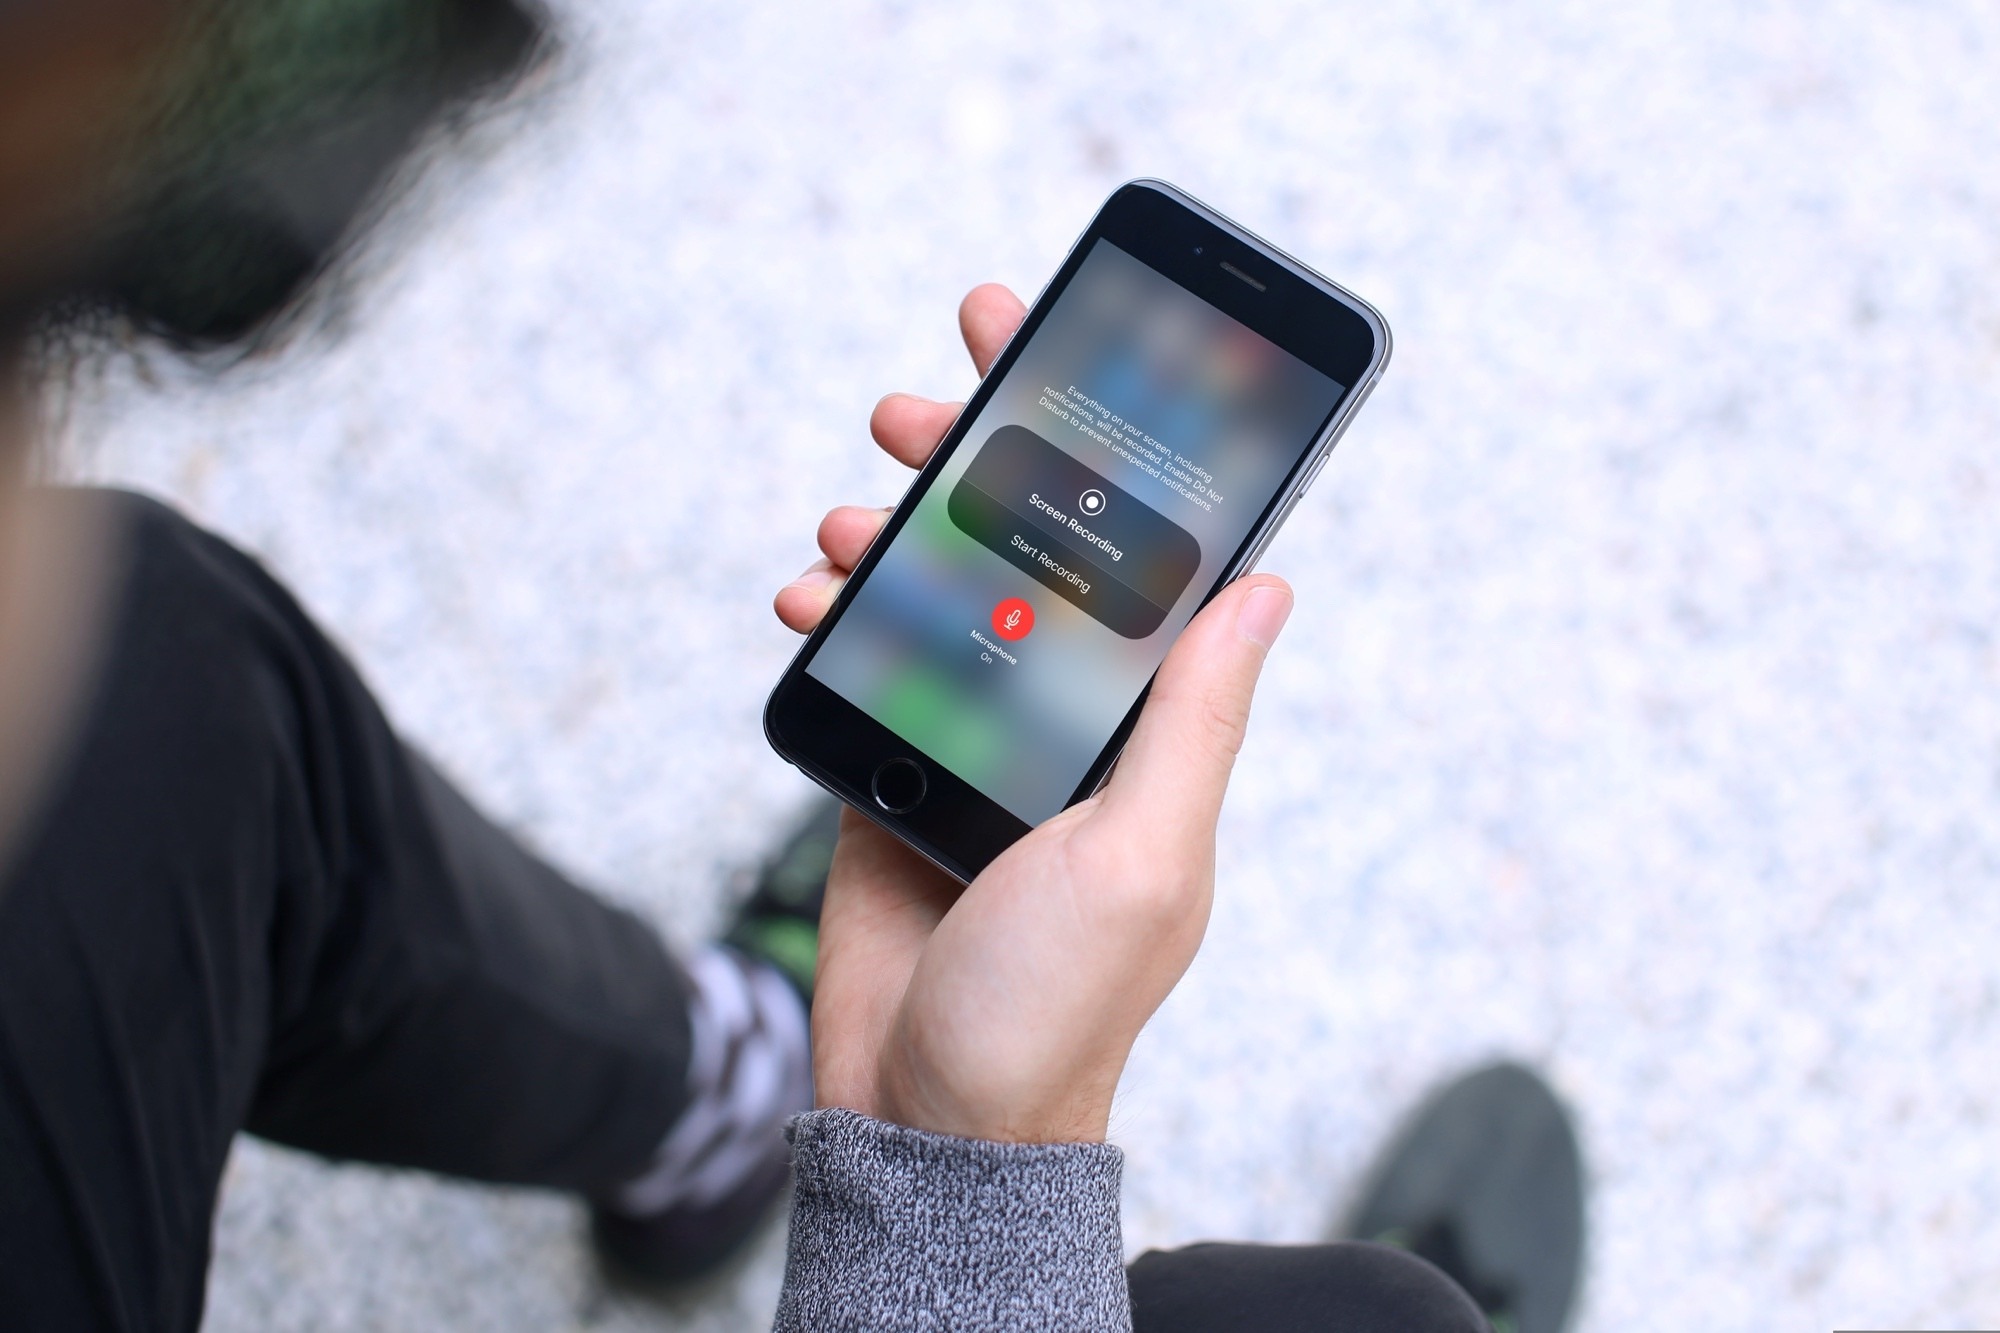 how-to-record-phone-calls-on-iphone-without-them-knowing